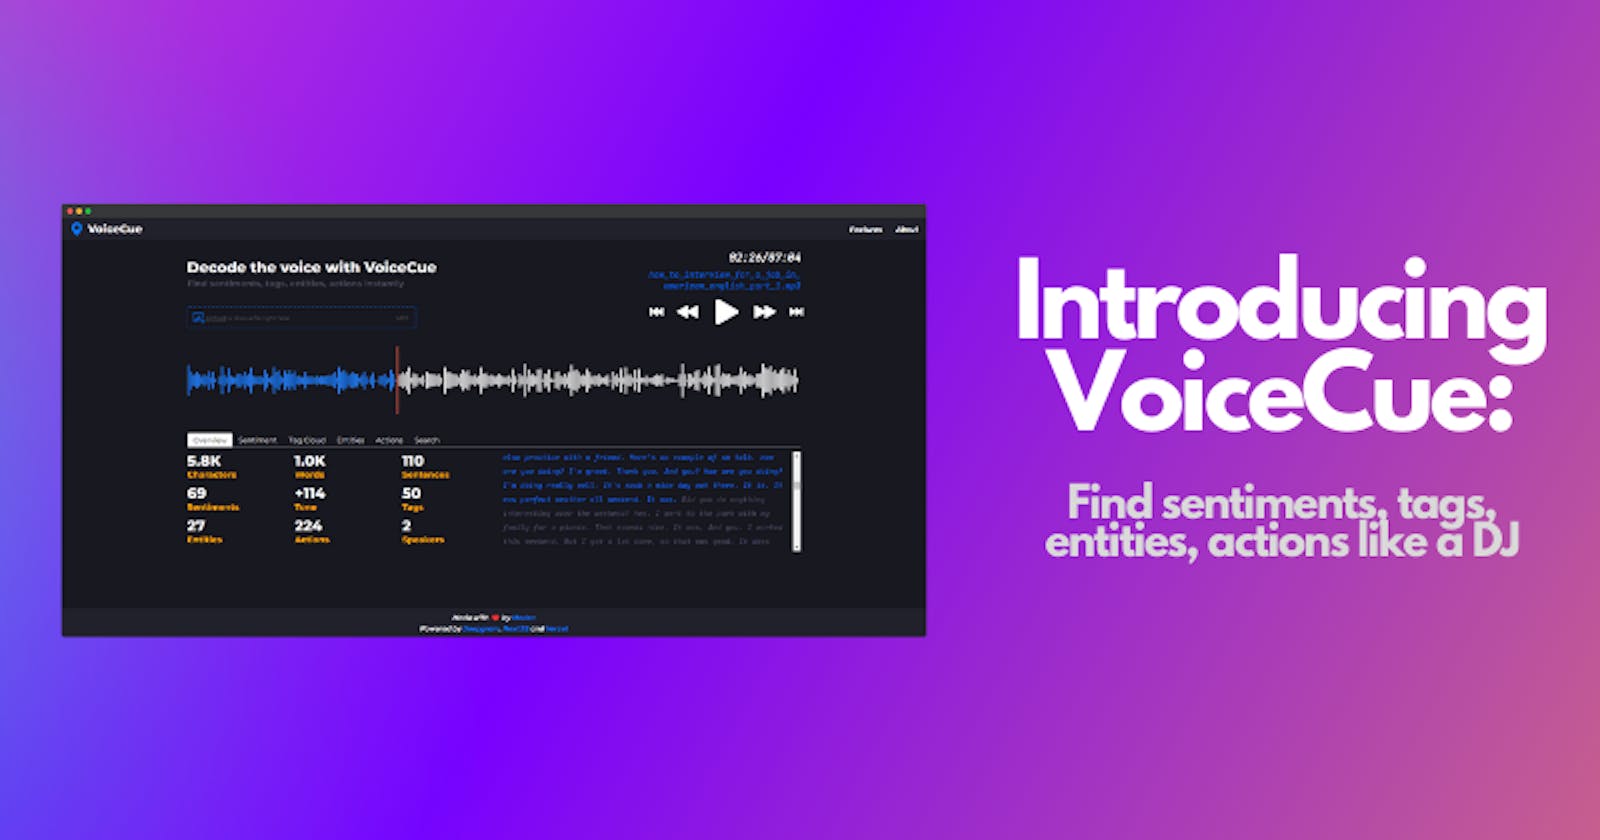 Introducing VoiceCue - Find sentiments, tags, entities, actions like a DJ 🔥✨